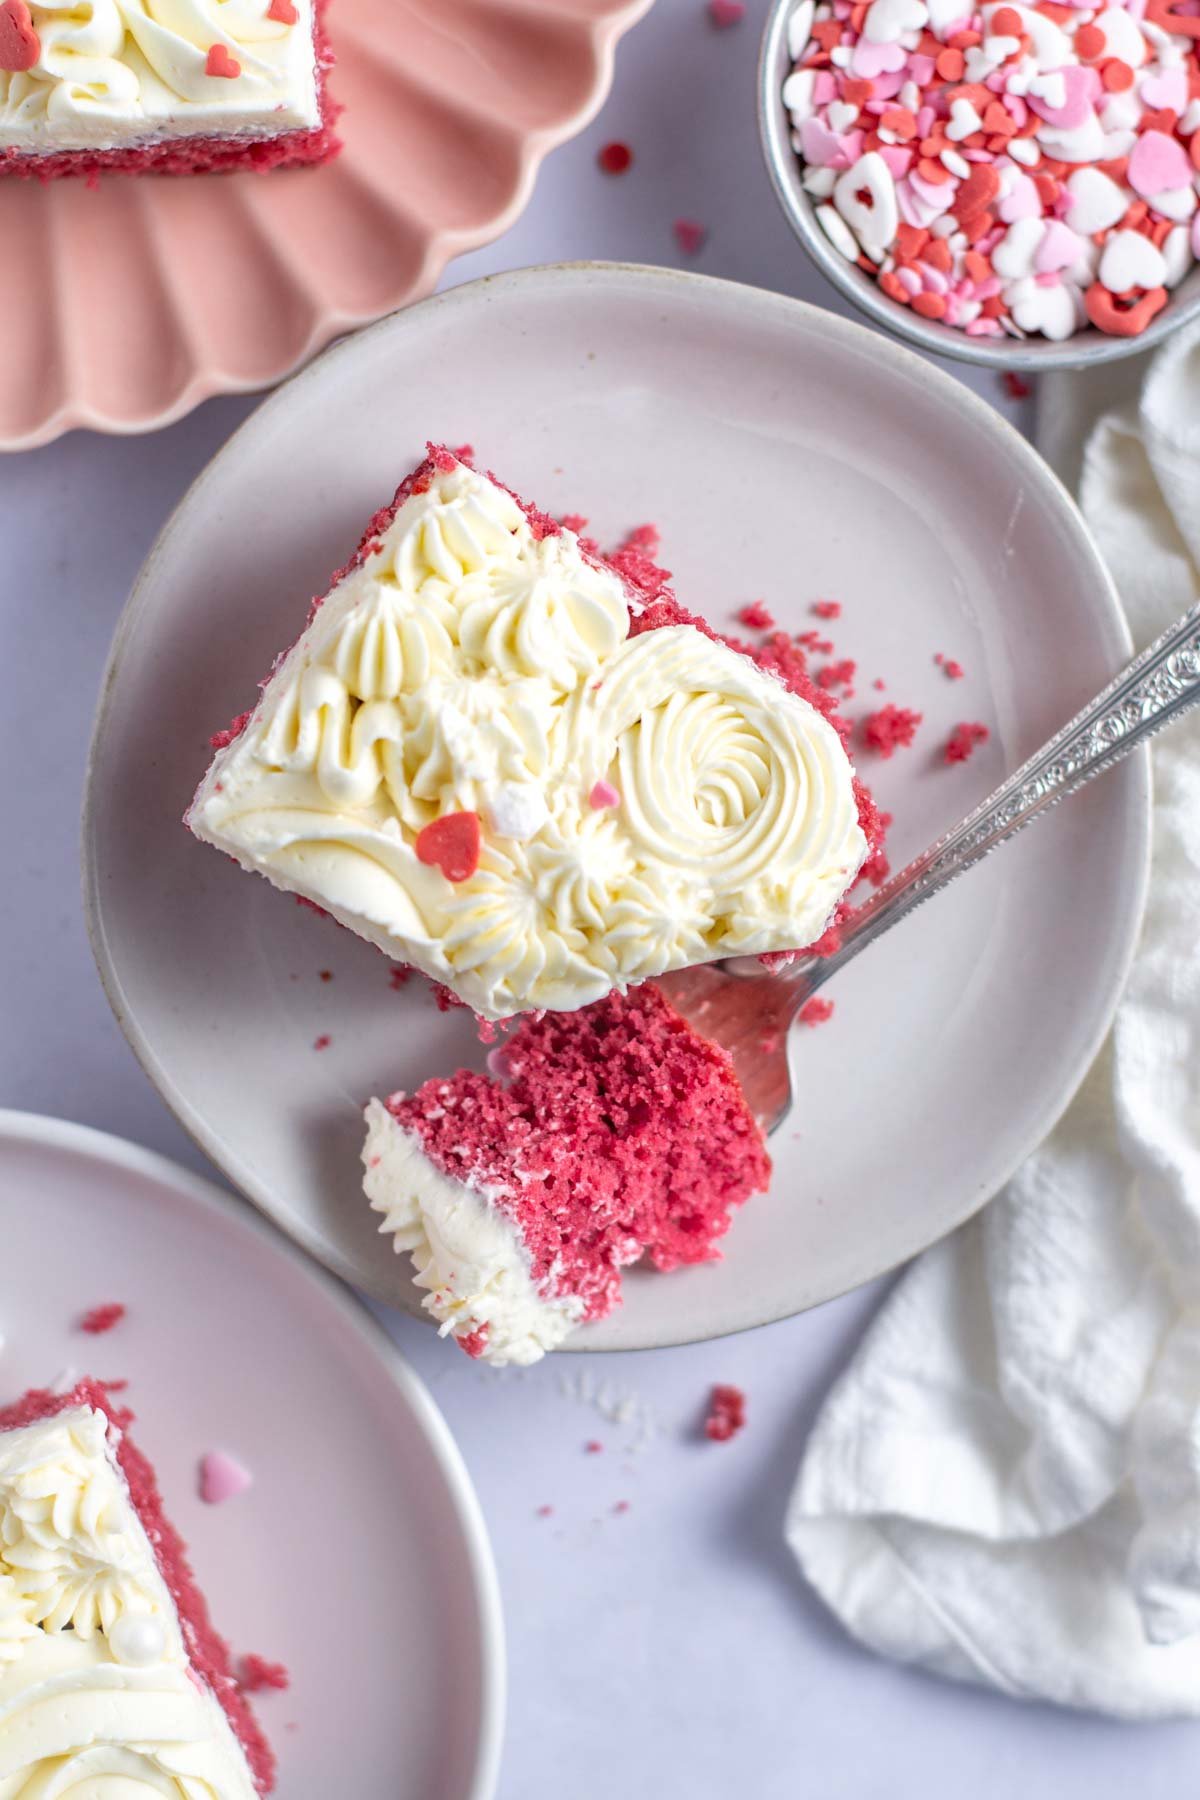 slice of pink velvet cake on a plate with a bite on a fork